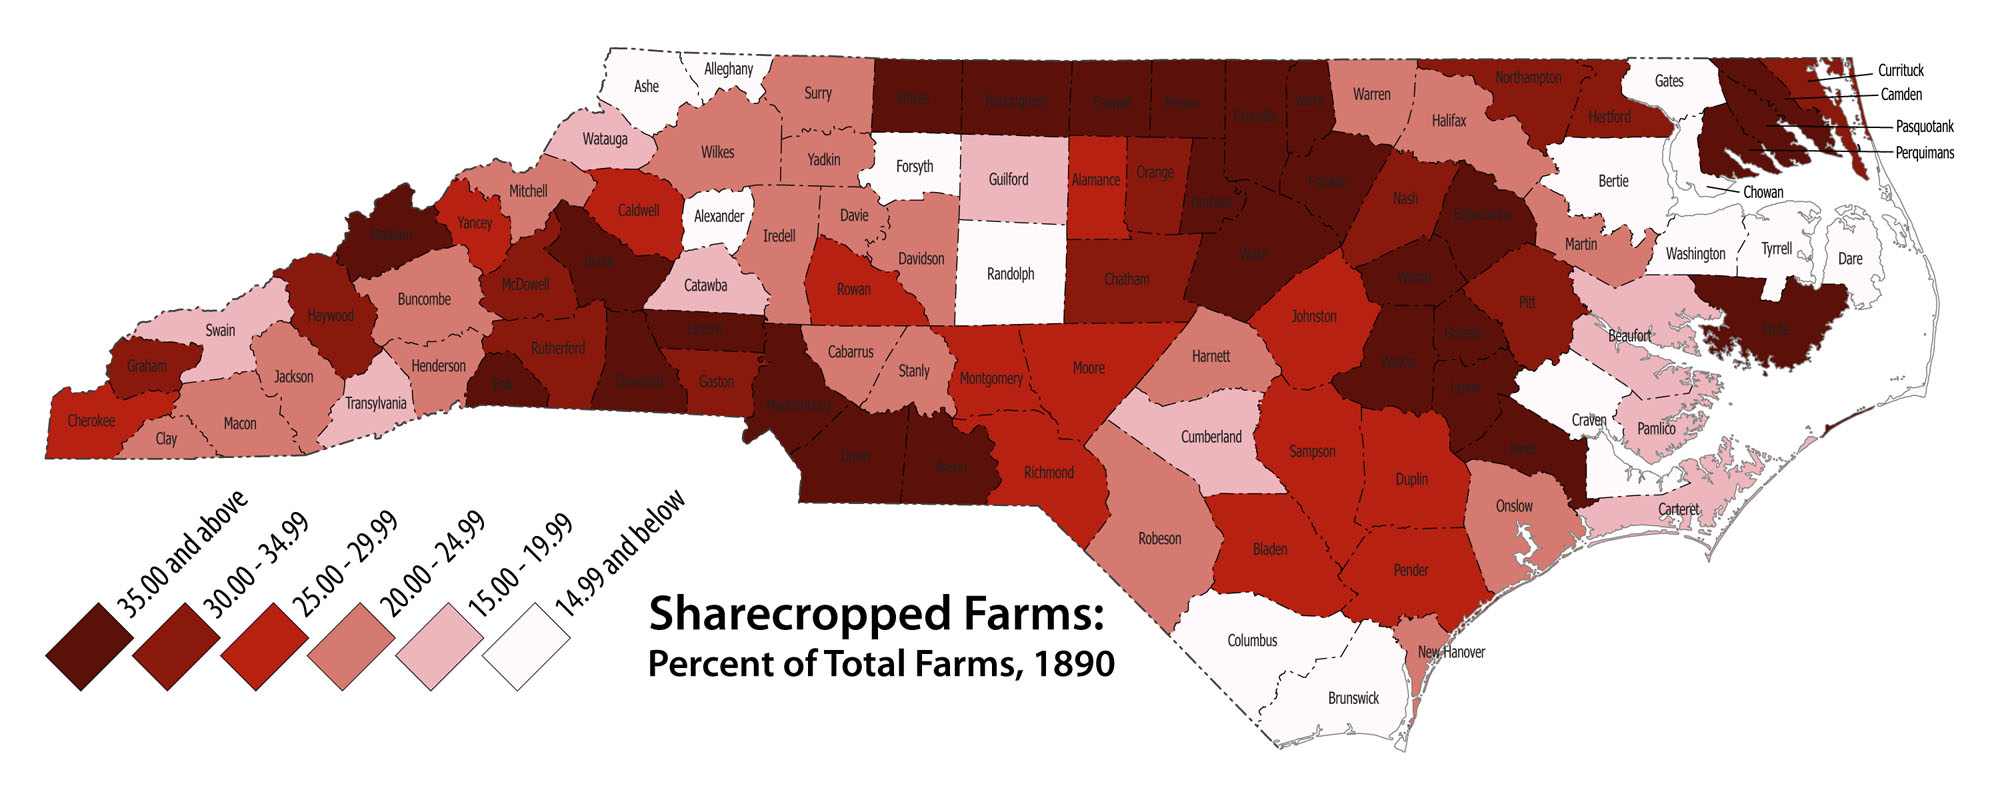 Sharecropped farms, 1890.